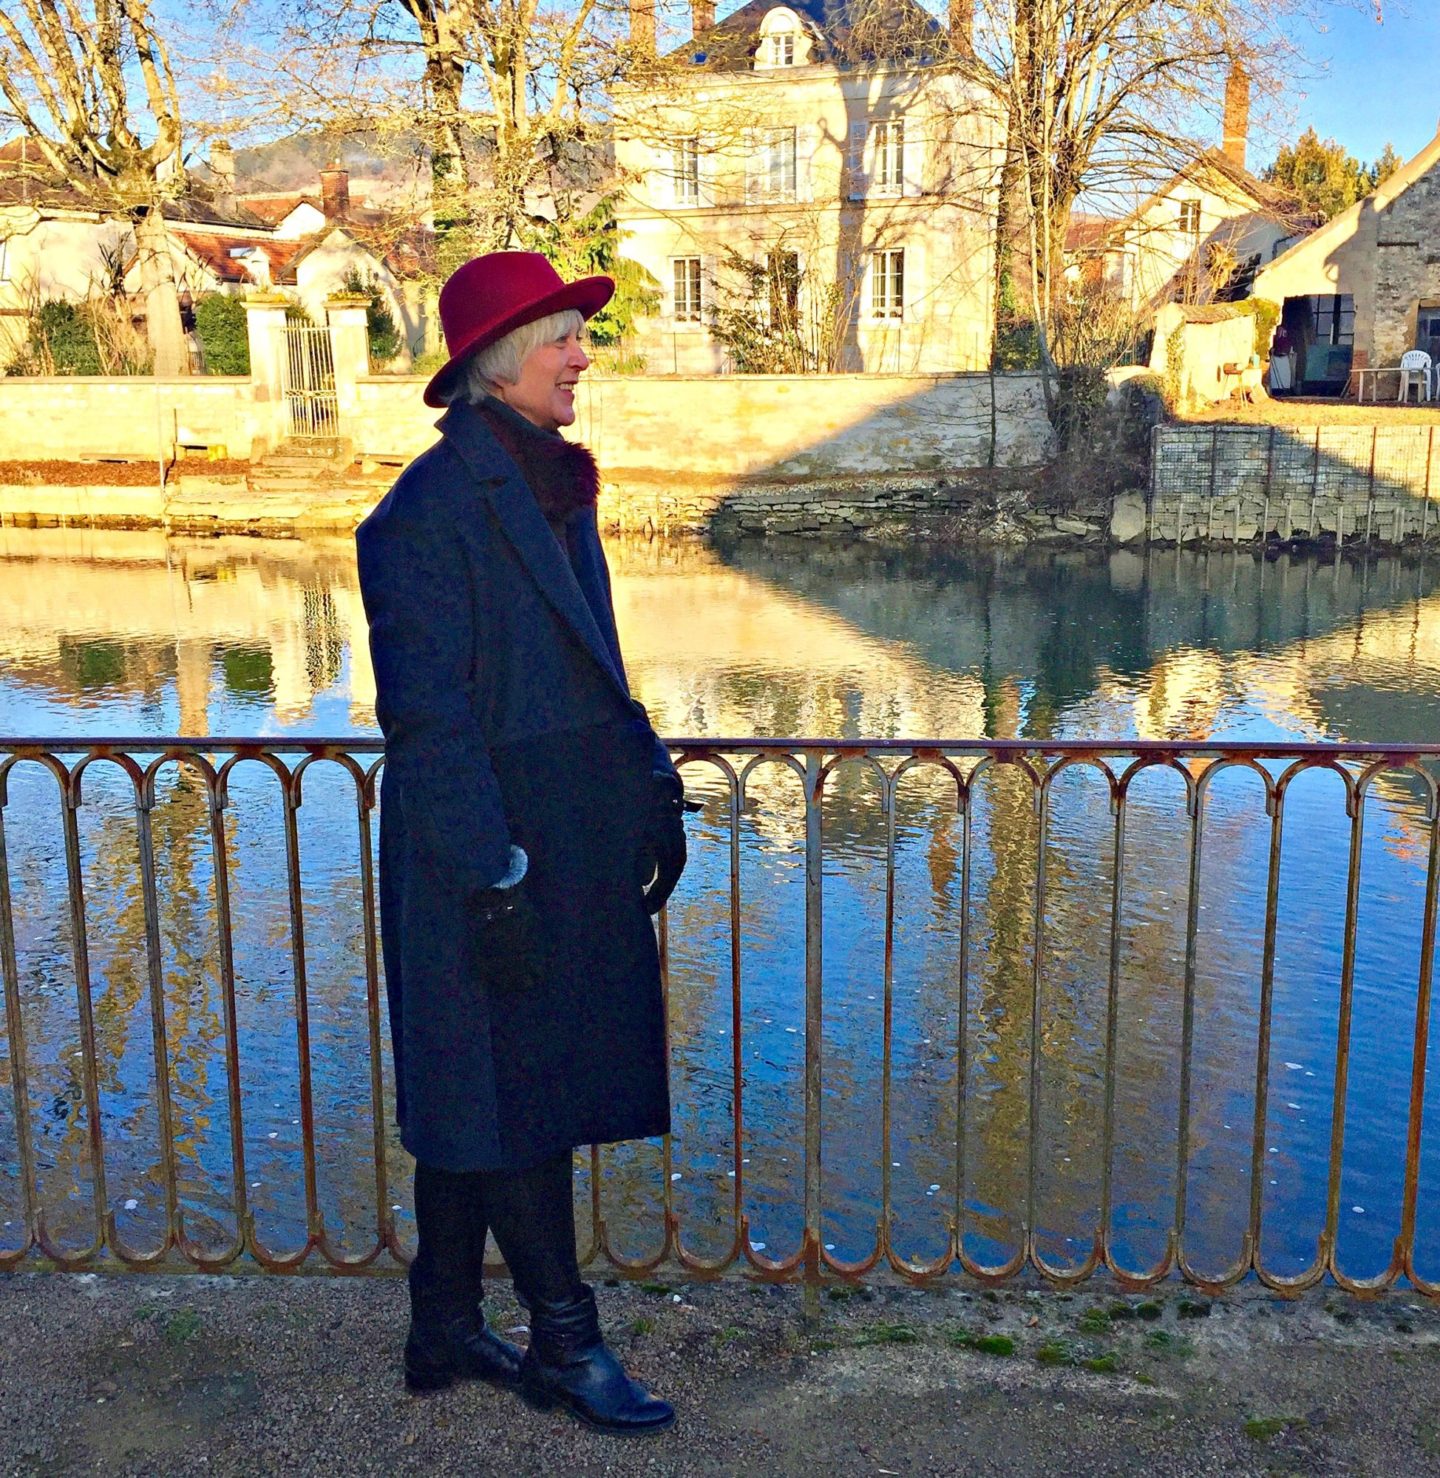 warm coat and red hat to keep warm in Chablis